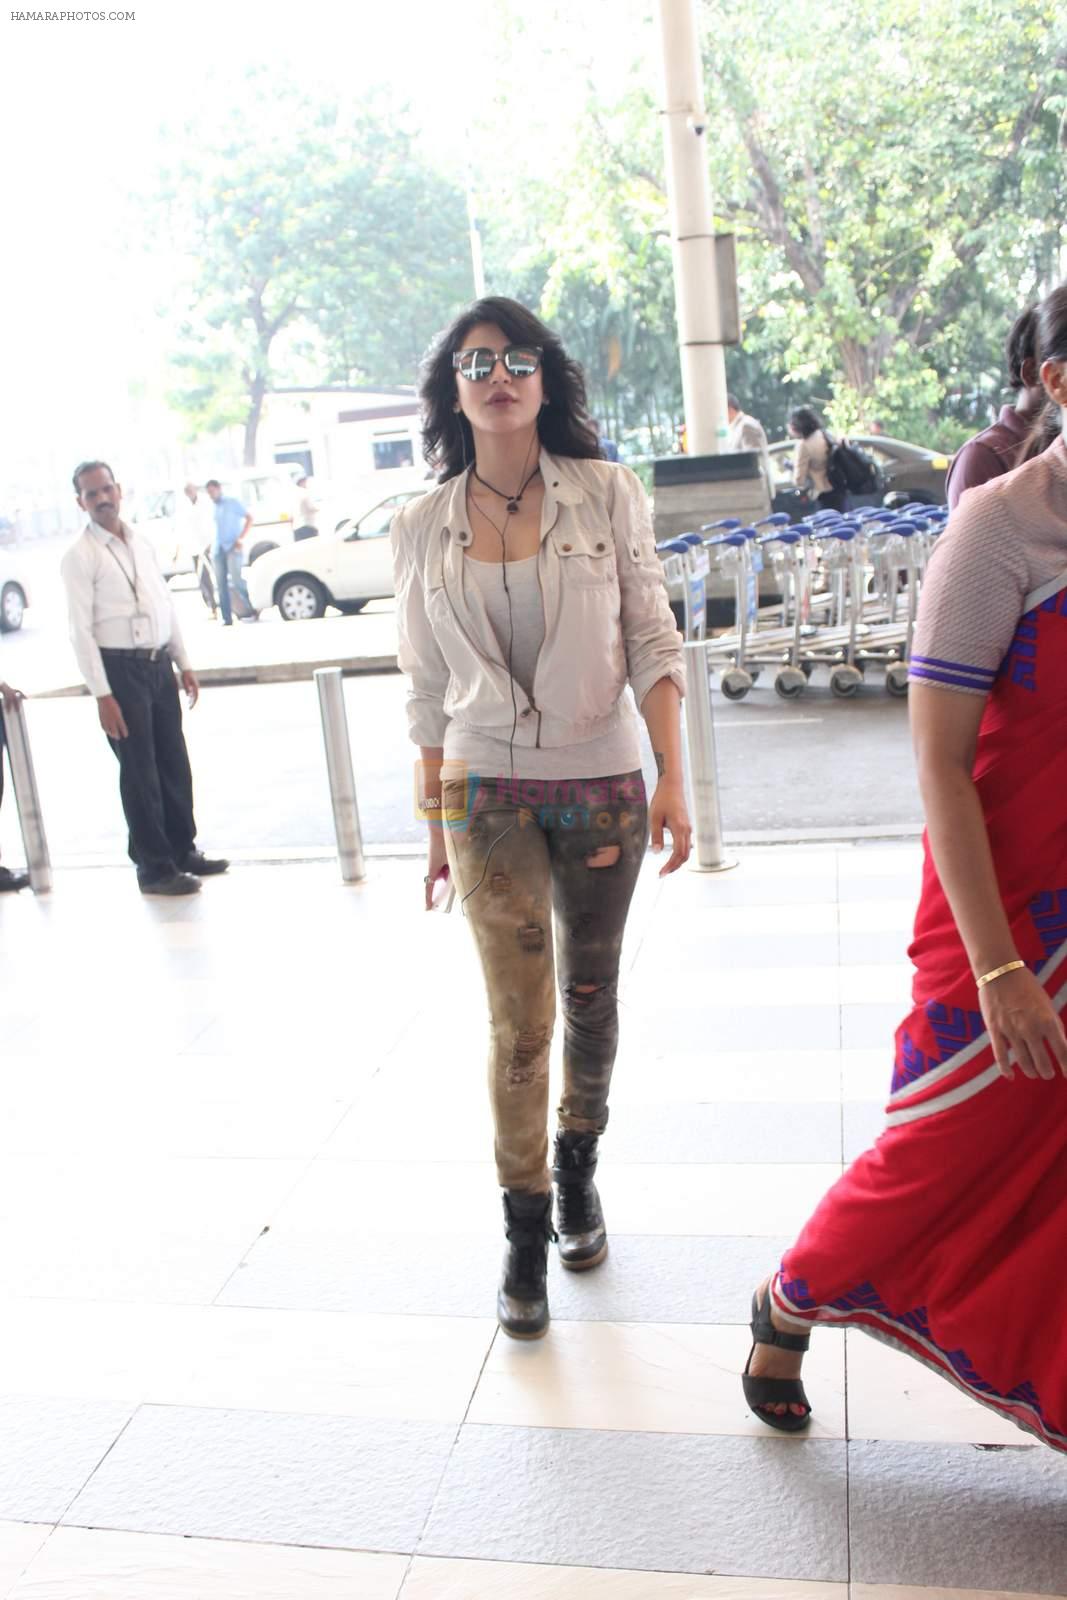 Shruti Haasan snapped at airport on 14th Oct 2015